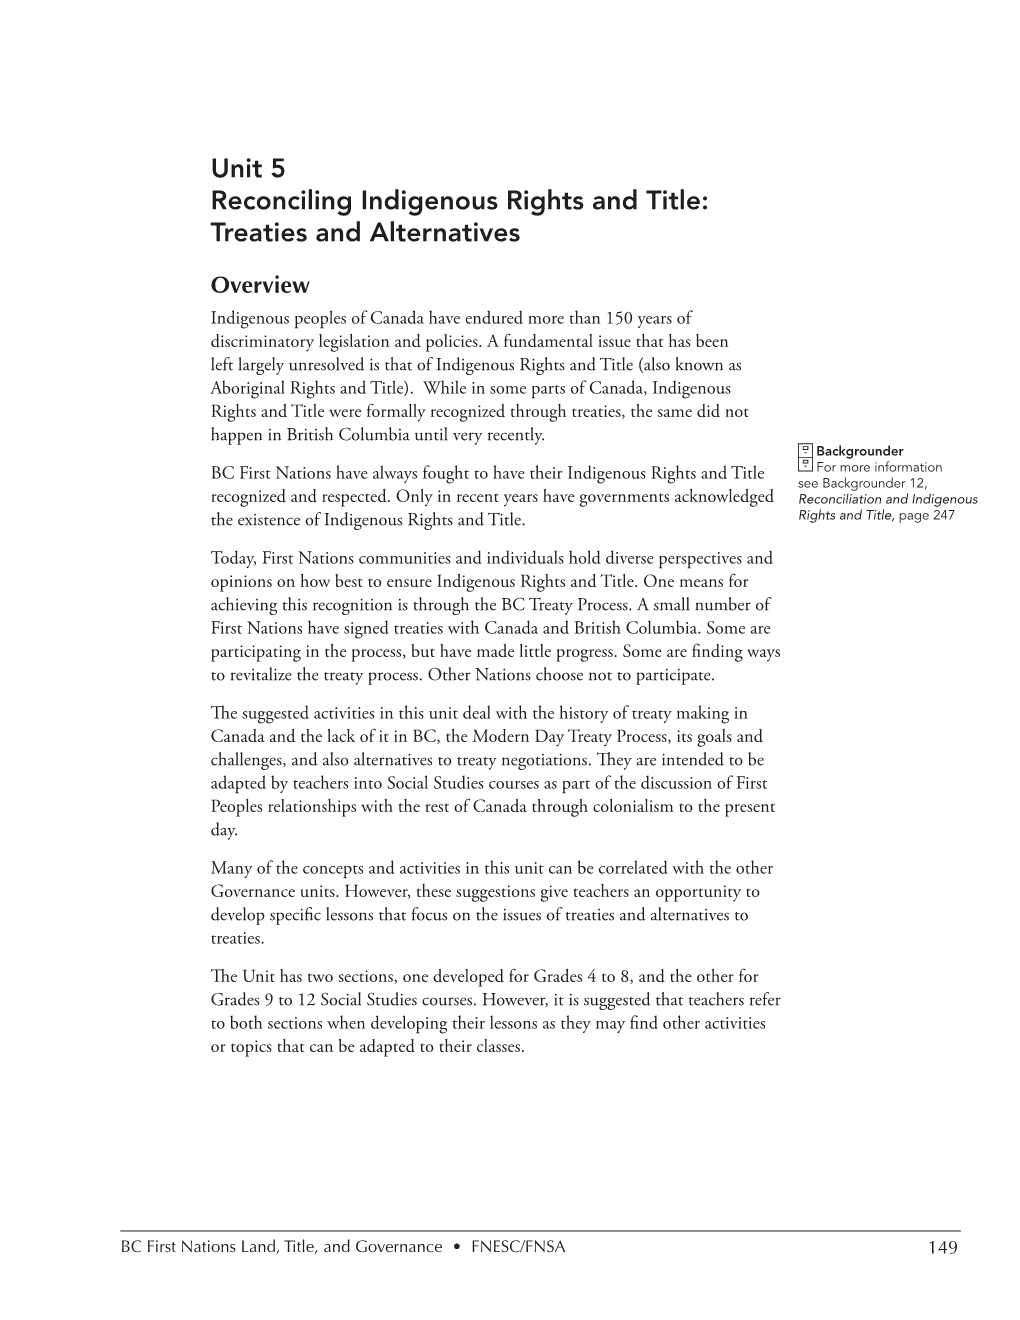 Unit 5 Reconciling Indigenous Rights and Title: Treaties and Alternatives